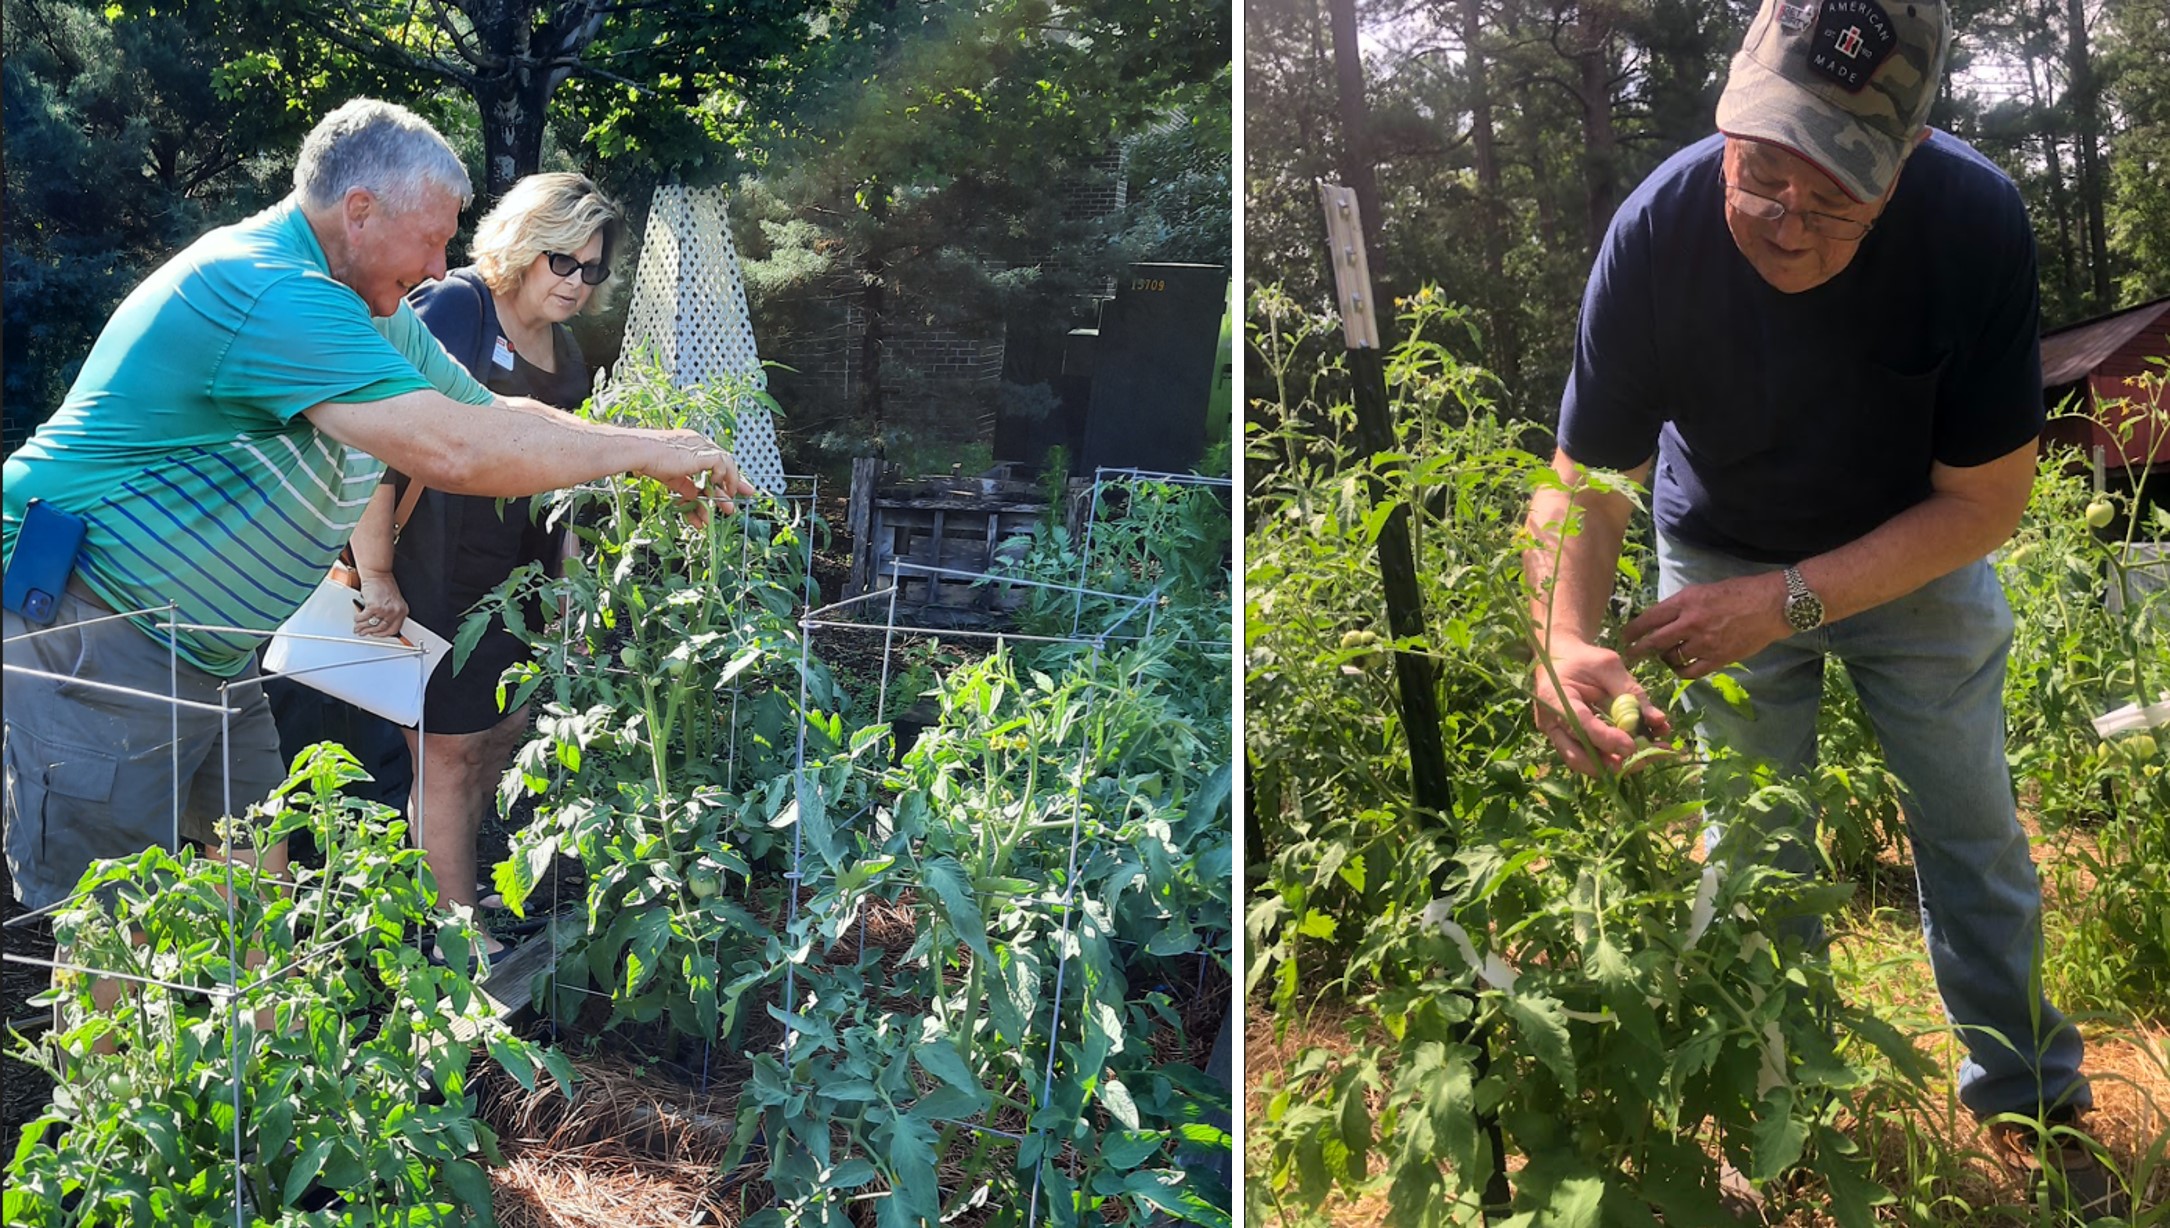 Master gardener volunteers inspect tomato plants for insect and disease issues.